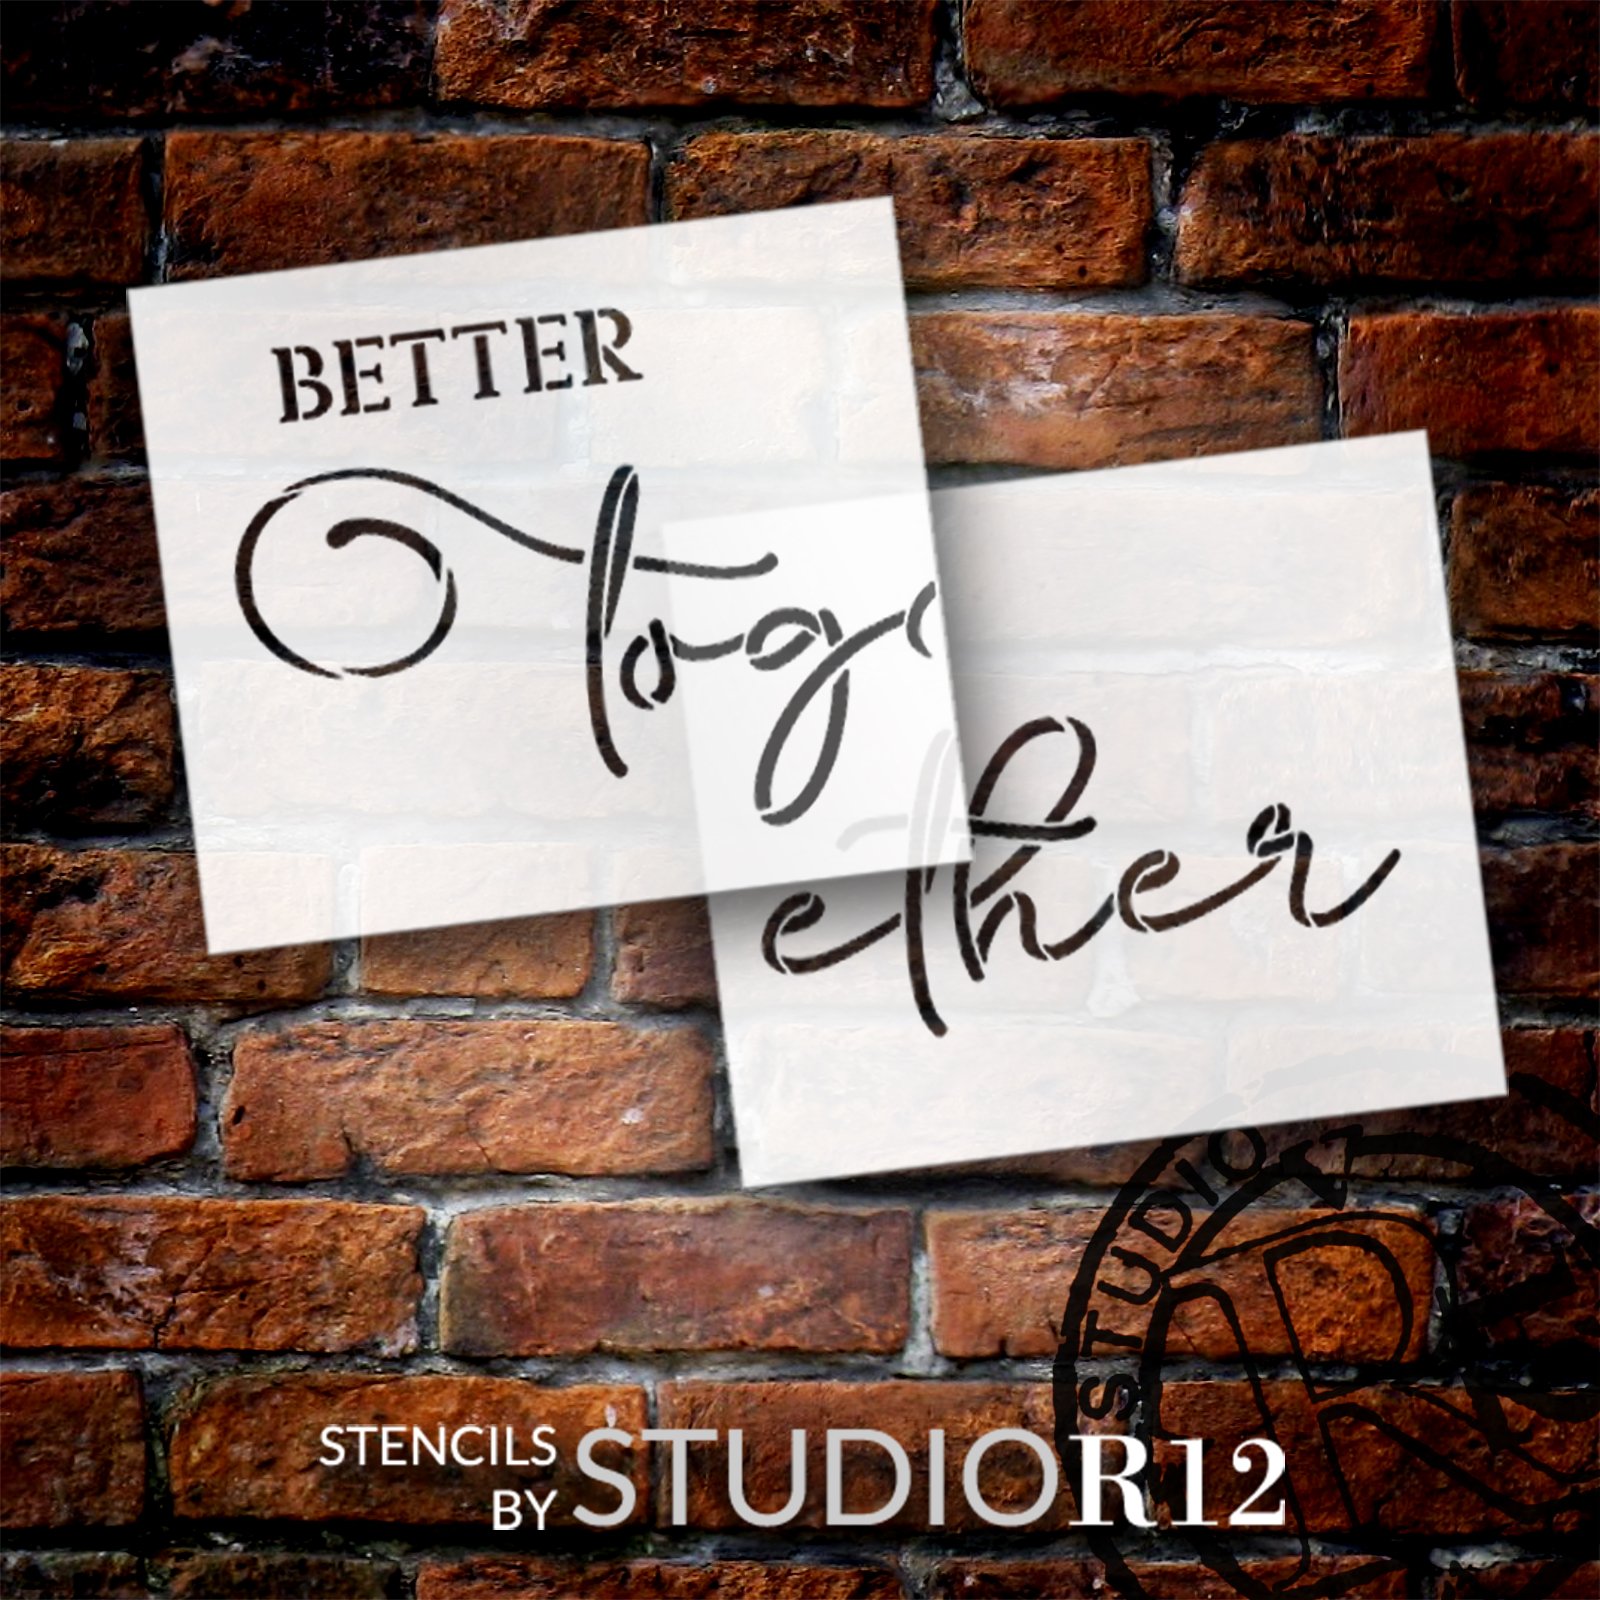 Better Together Script Stencil for Painting by StudioR12 | Craft DIY Jumbo Home & Living Room Decor | Paint Oversized Wood Signs | Select Size